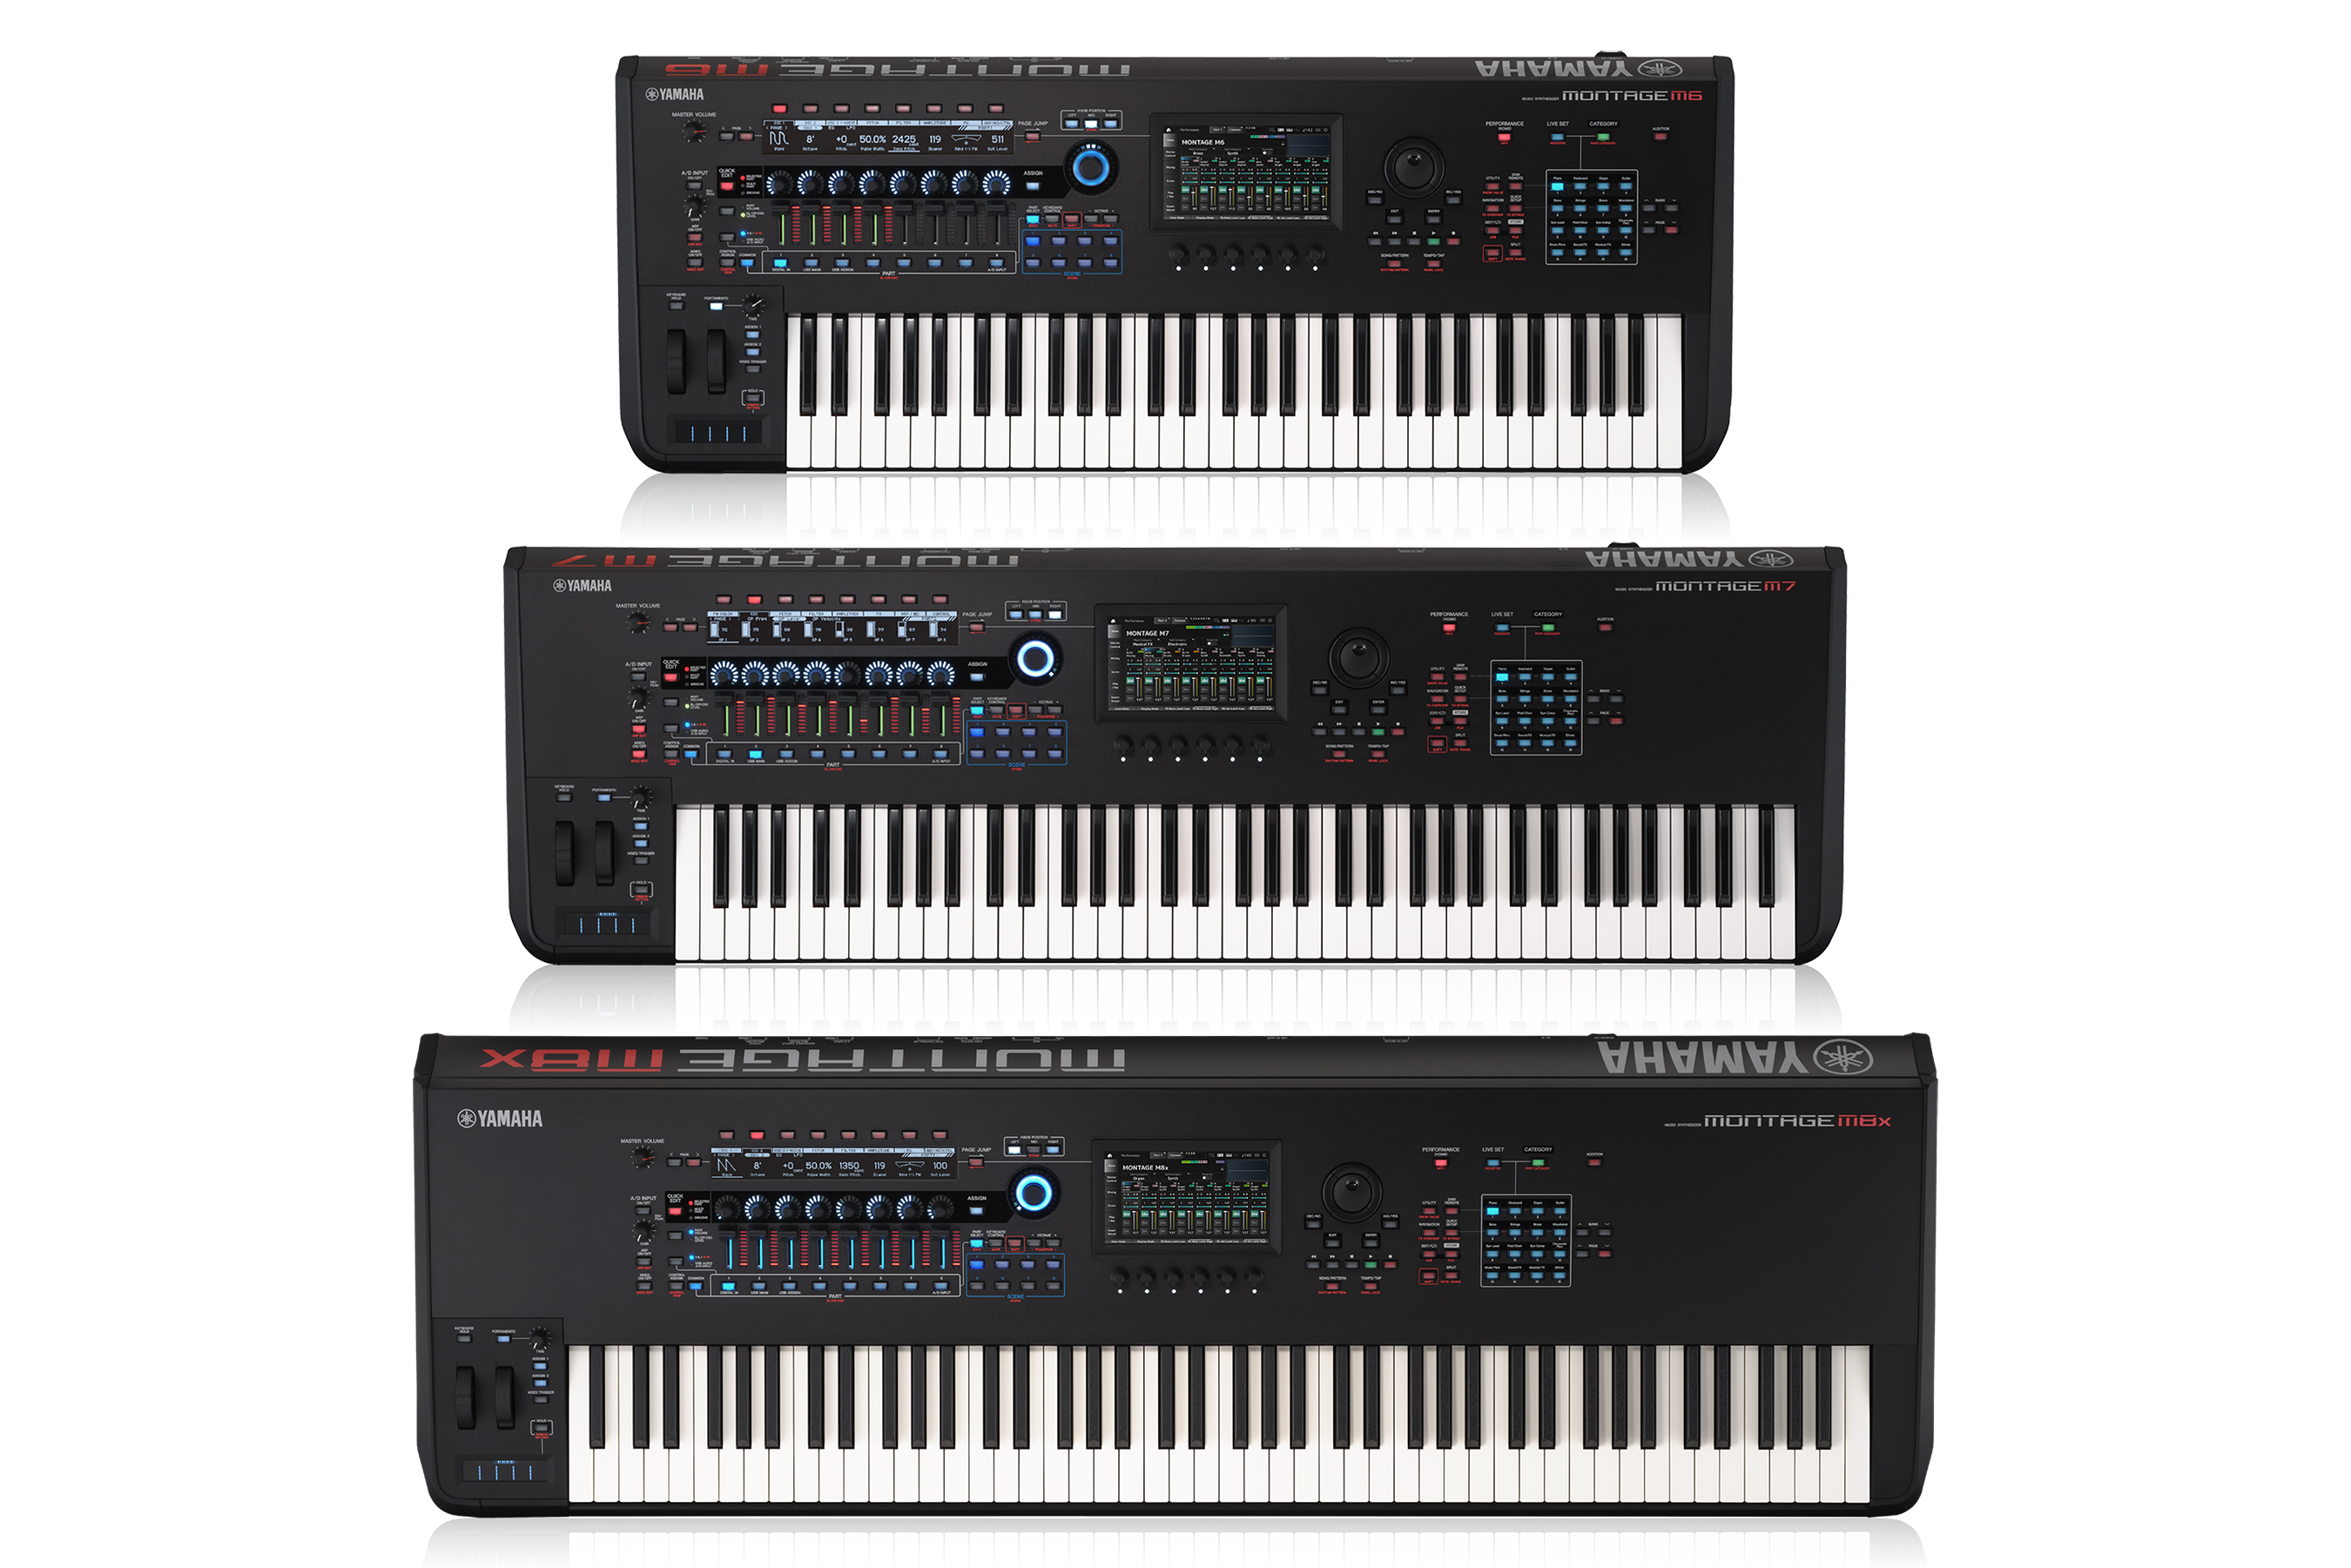 To learn more about the MONTAGE M synthesizers, please visit Yamaha.io/MONTAGEM.